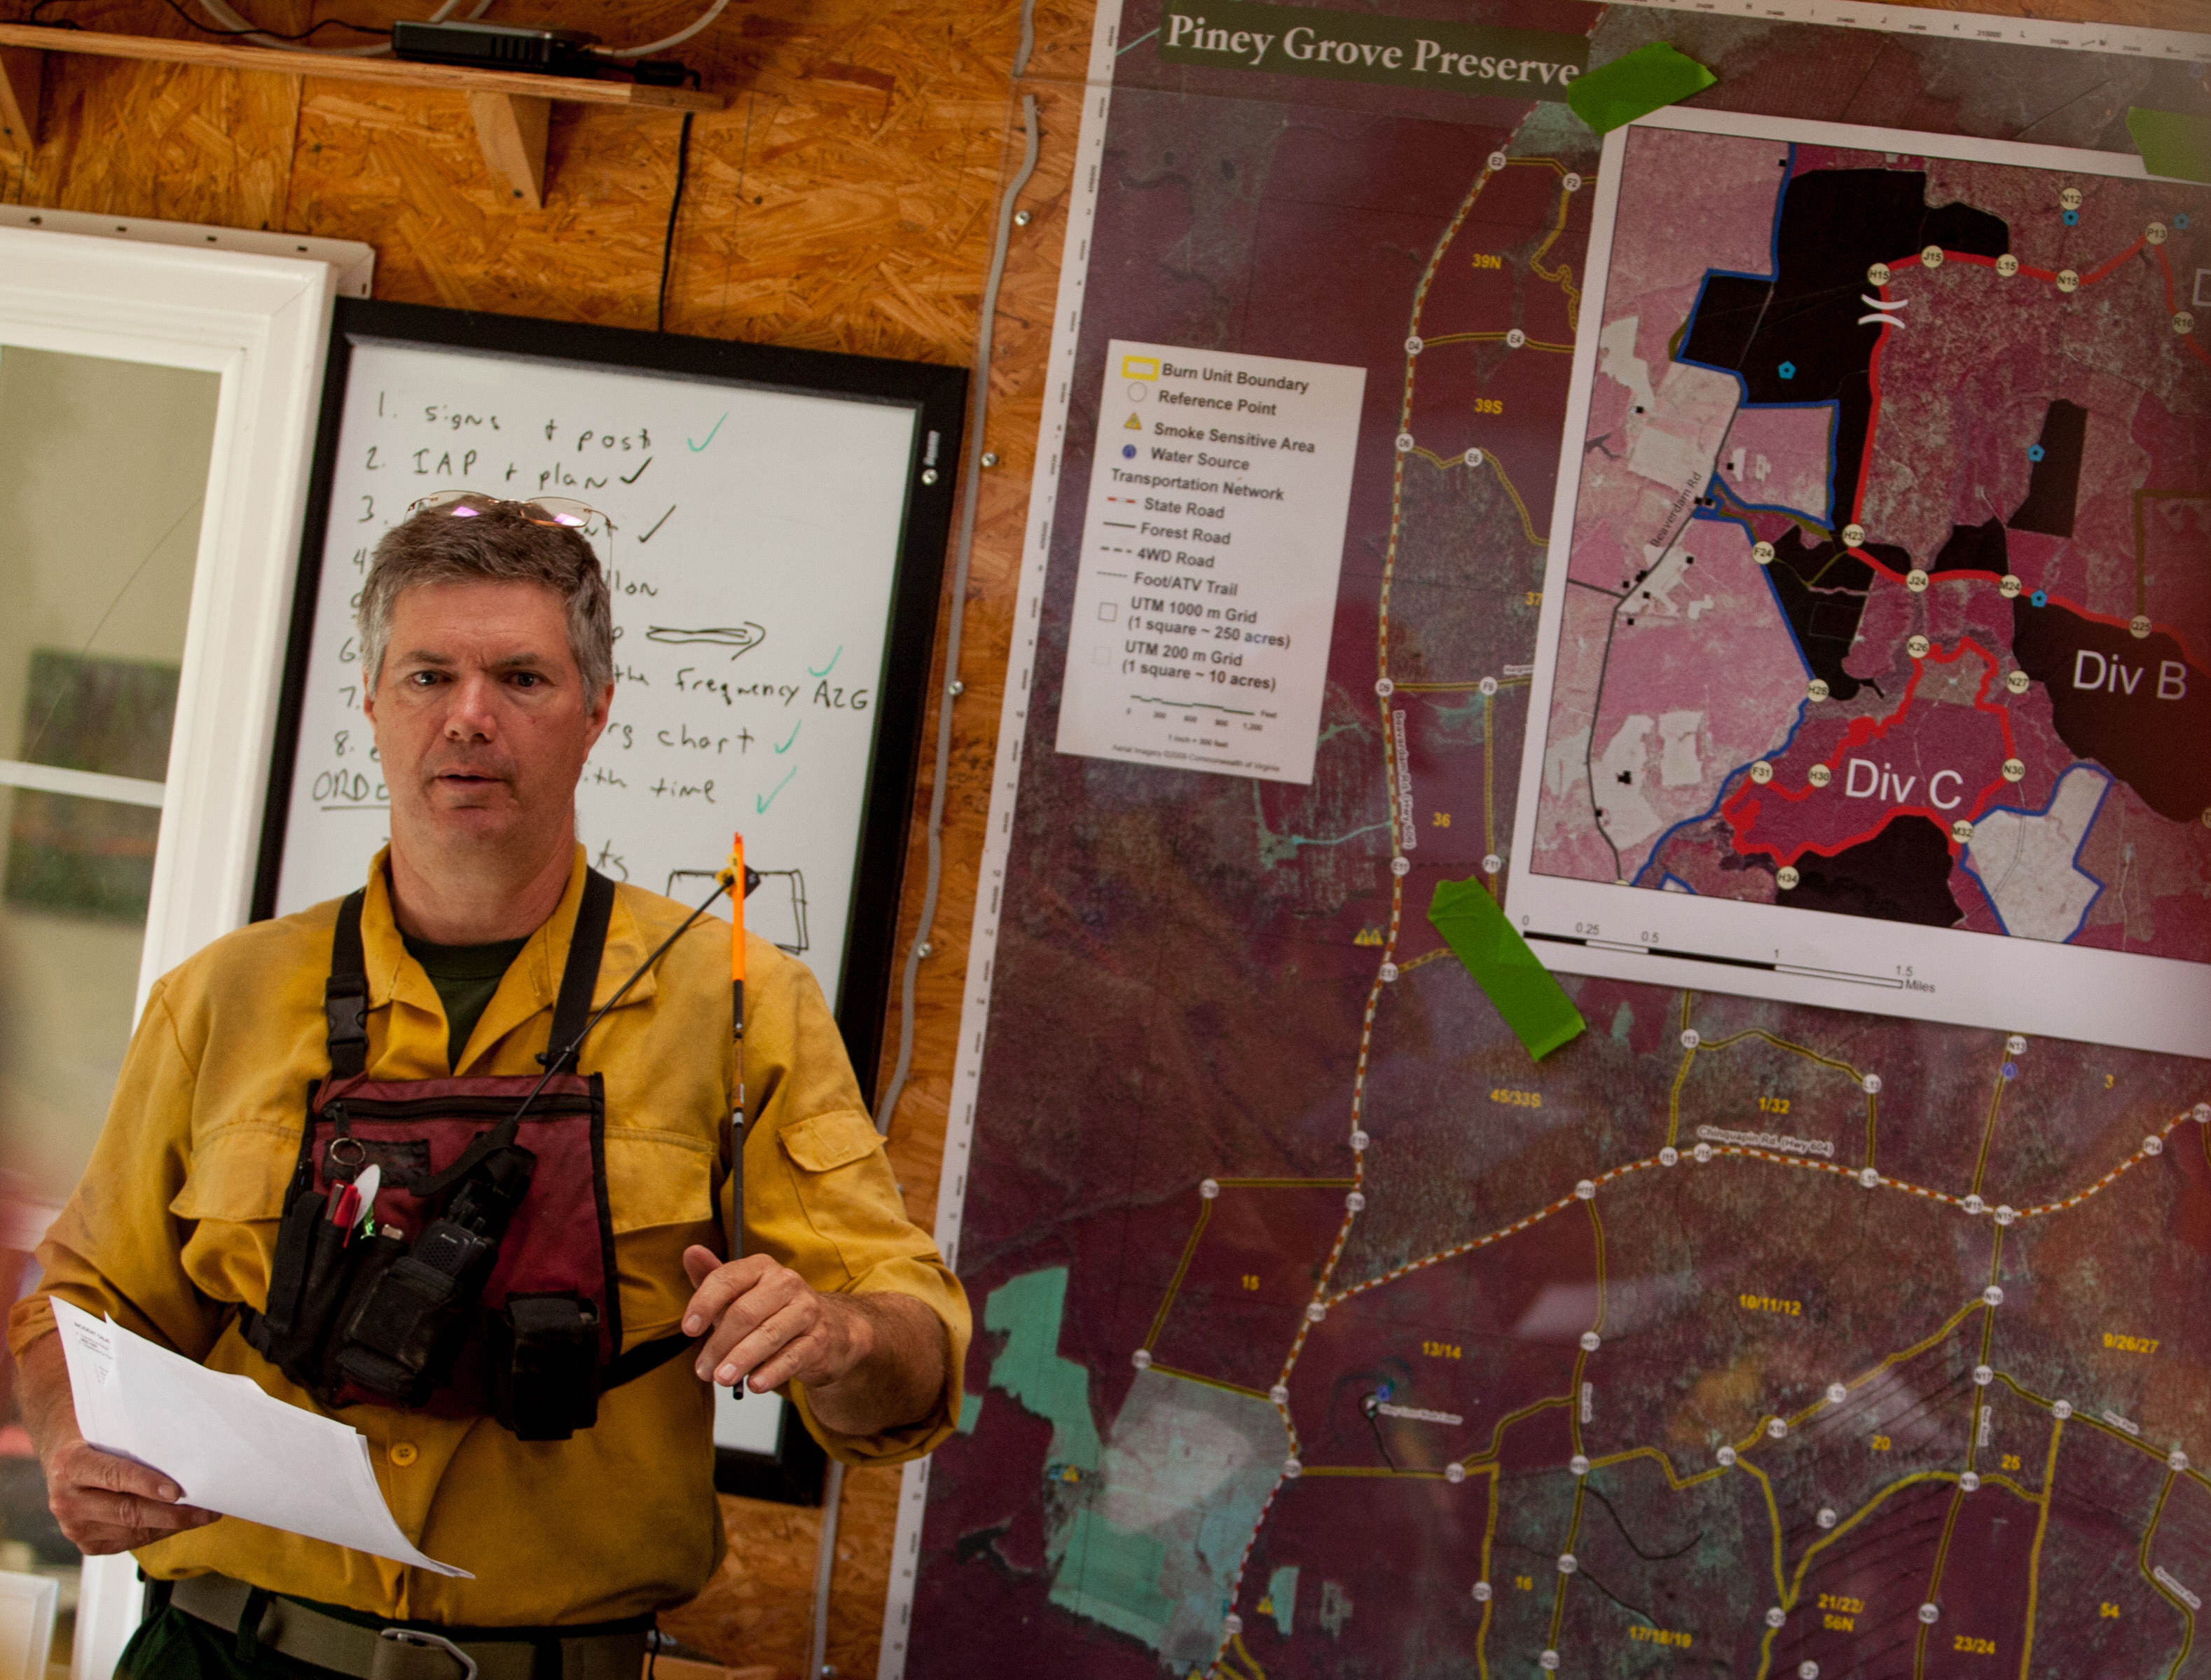 Preserve manager Bobby Clontz leads the briefing before the start of a controlled burn. A man wearing yellow fire gear stands in front of a large map showing burn areas within the preserve.